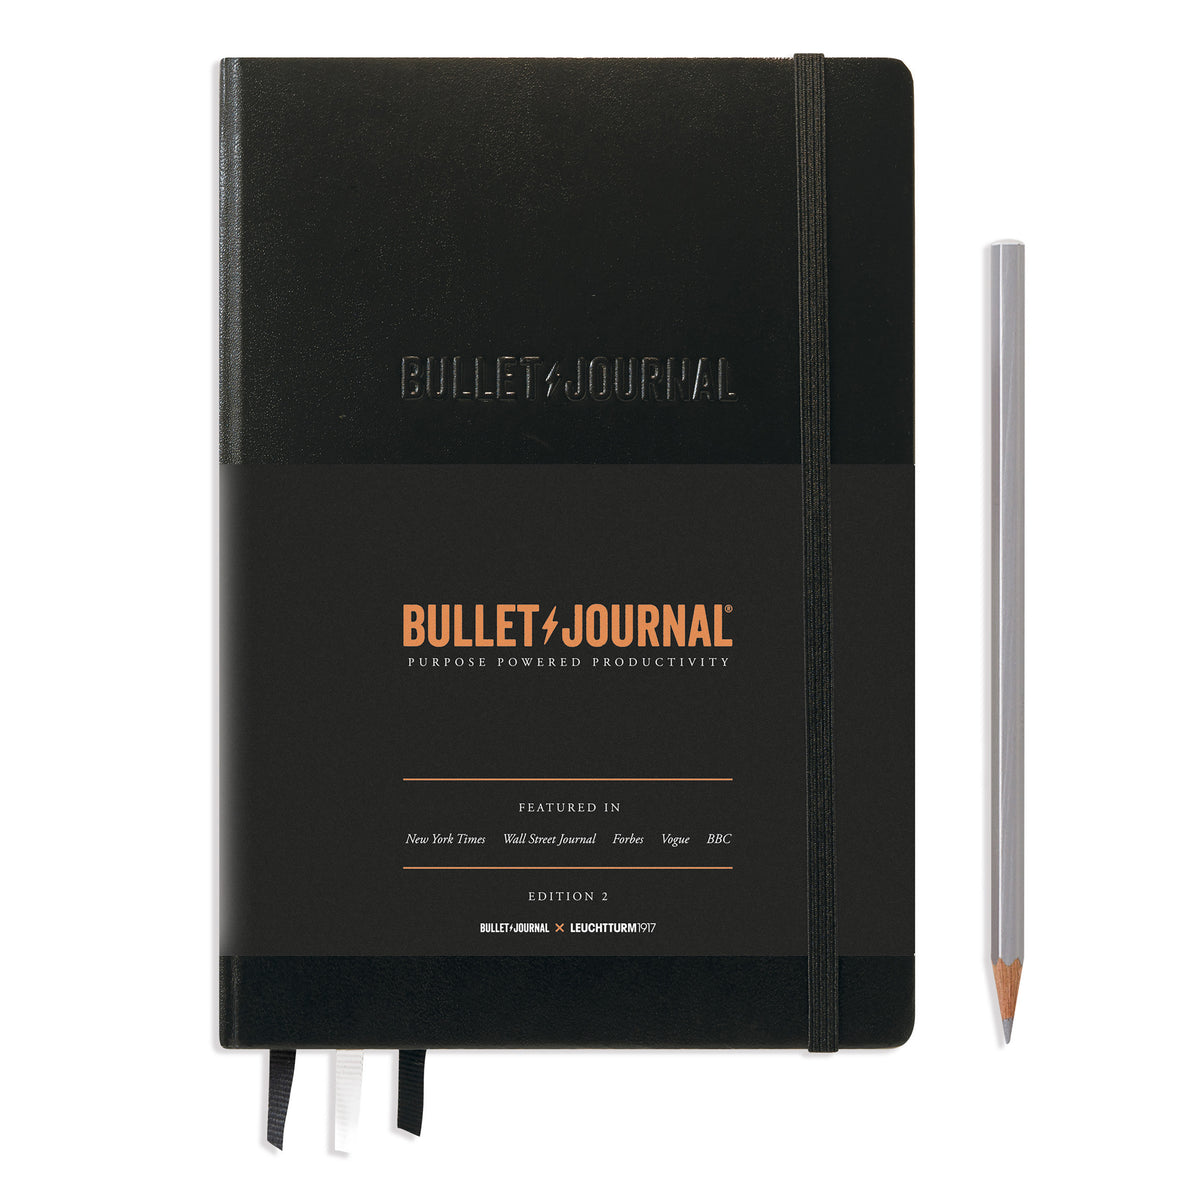 A black bullet journal notebook. It has an elastic band keeping it together and a black paper band covering three quarters of the book detailing that it&#39;s a bullet journal. Embossed on the front cover are the words in capitals BULLET JOURNAL.